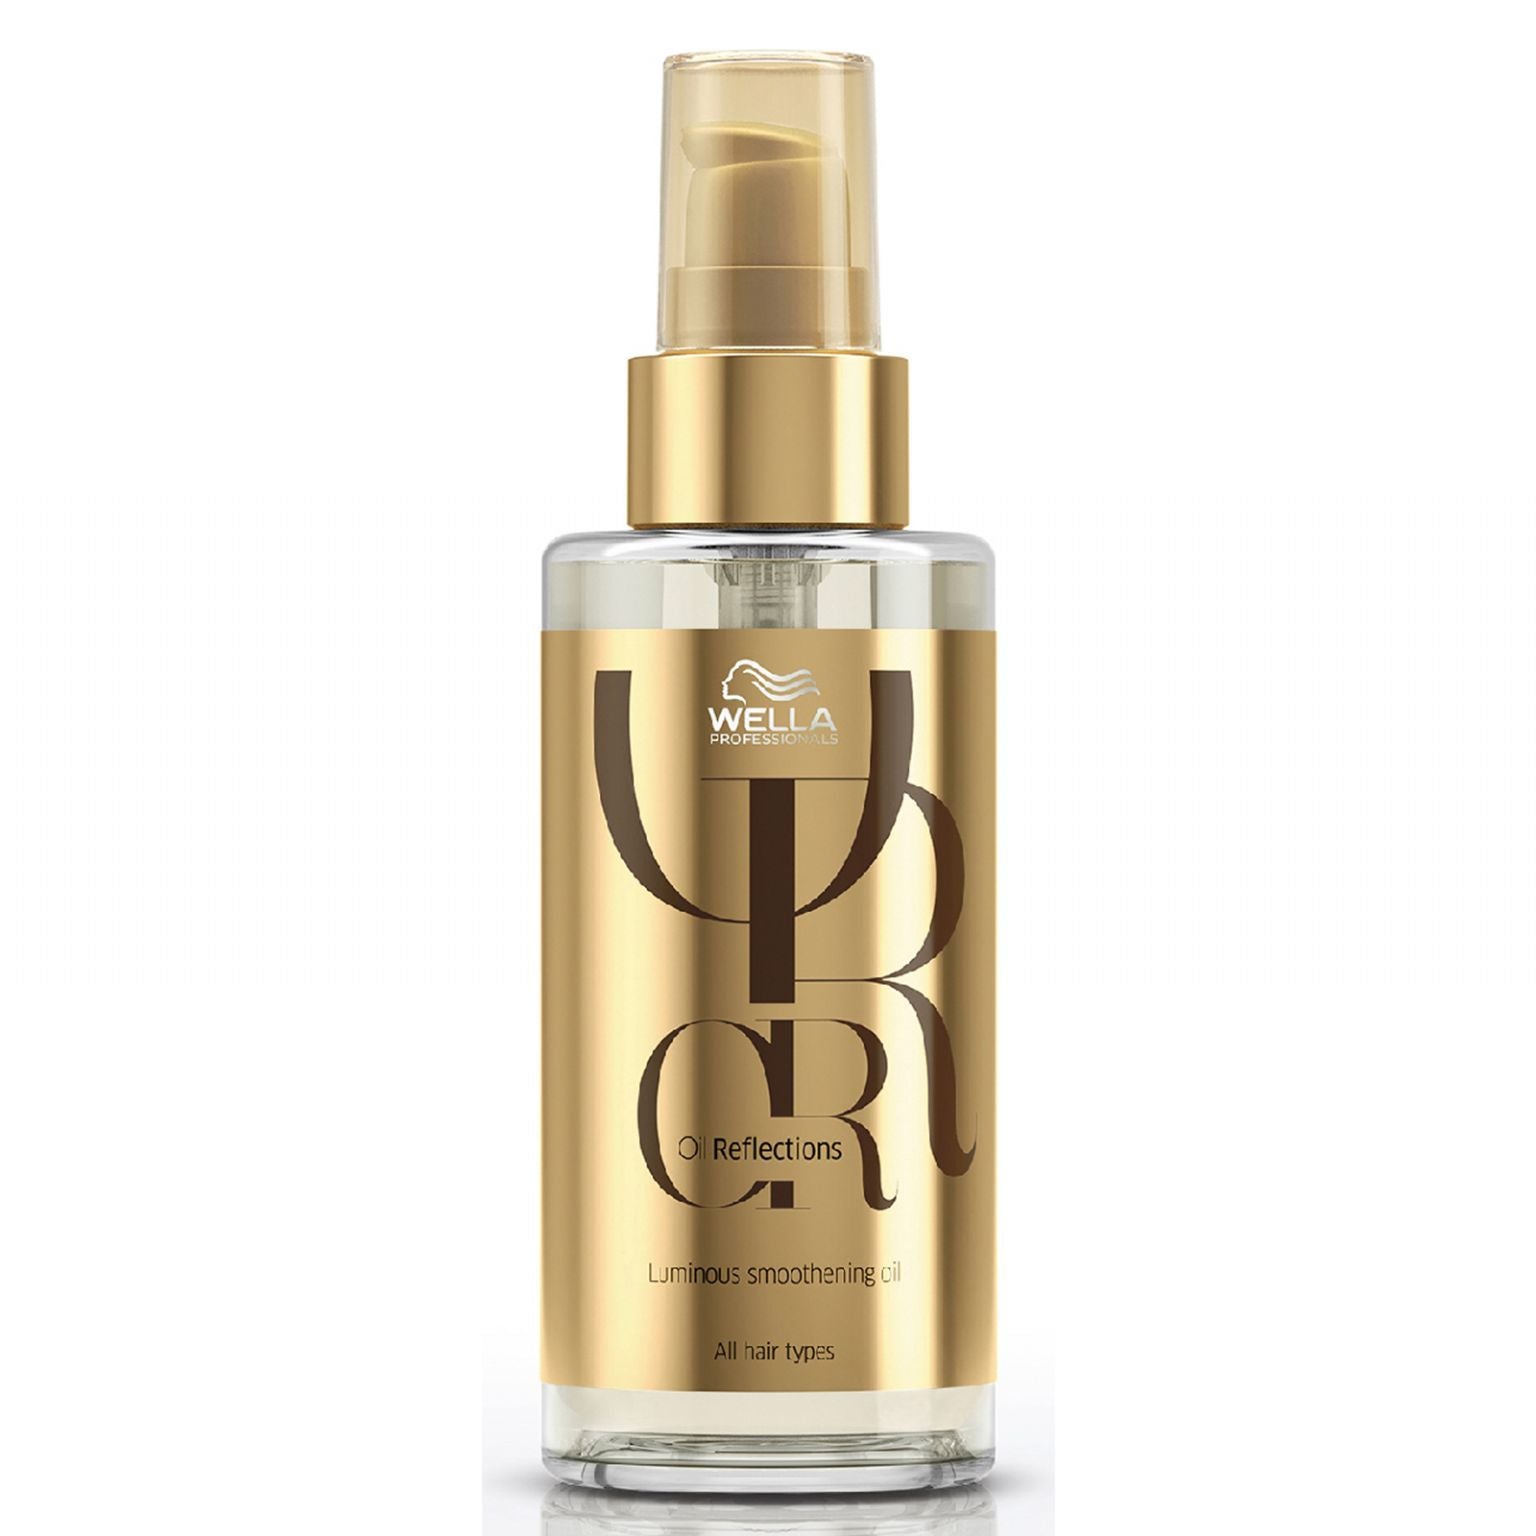 Luxury_haircare_wella_oil_reflections_smoothing_oil_100ml